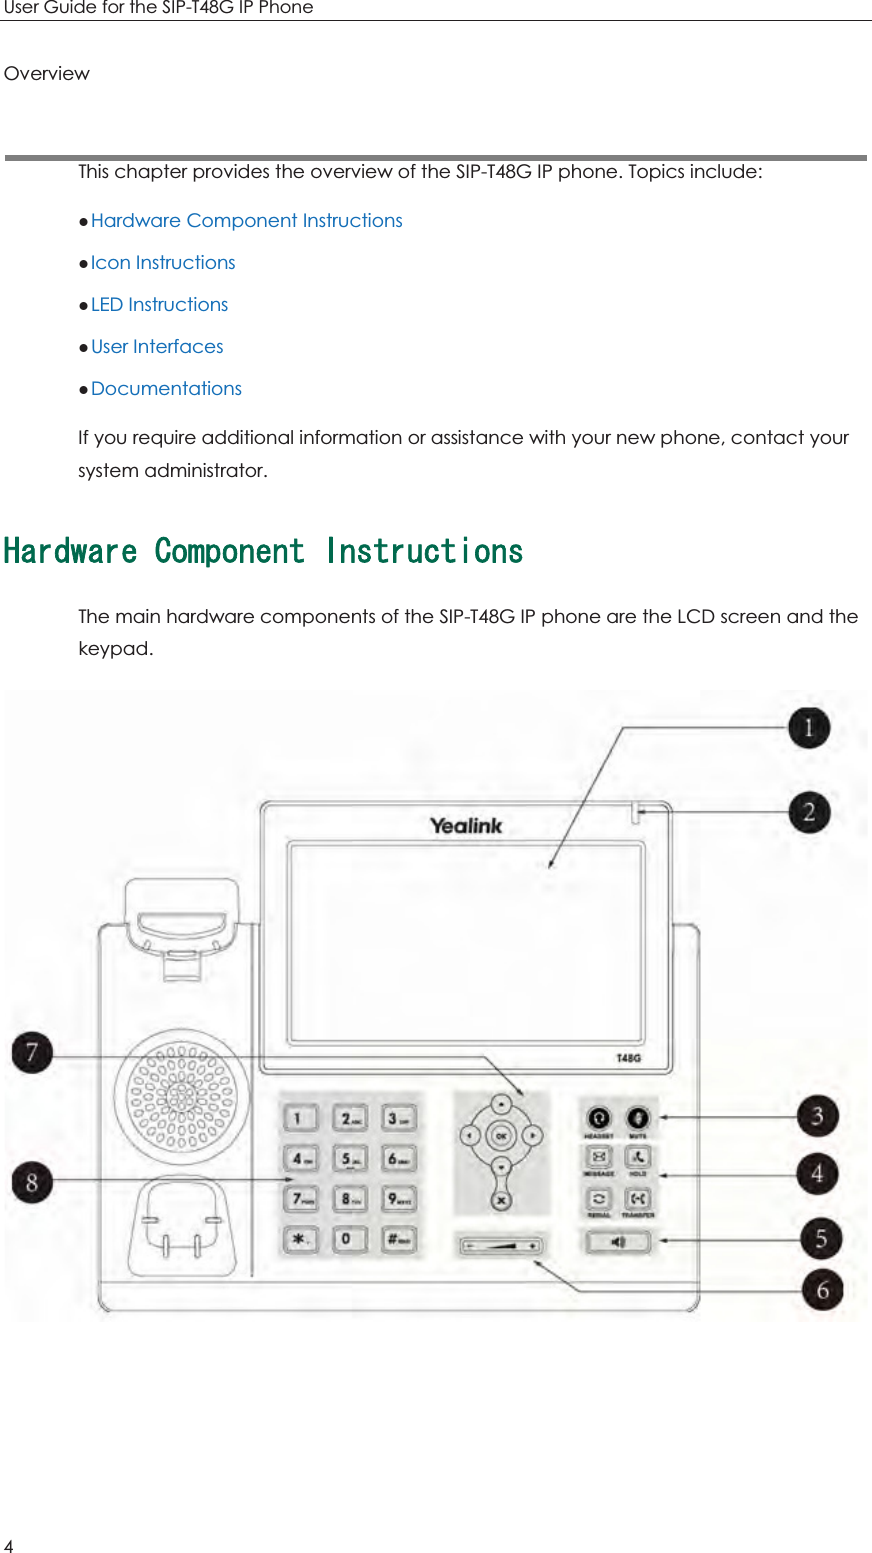 User Guide for the SIP-T48G IP Phone 4 Overview This chapter provides the overview of the SIP-T48G IP phone. Topics include: zHardware Component Instructions zIcon Instructions zLED Instructions zUser Interfaces zDocumentations If you require additional information or assistance with your new phone, contact your system administrator. *CTFYCTG%QORQPGPV+PUVTWEVKQPUThe main hardware components of the SIP-T48G IP phone are the LCD screen and the keypad. 